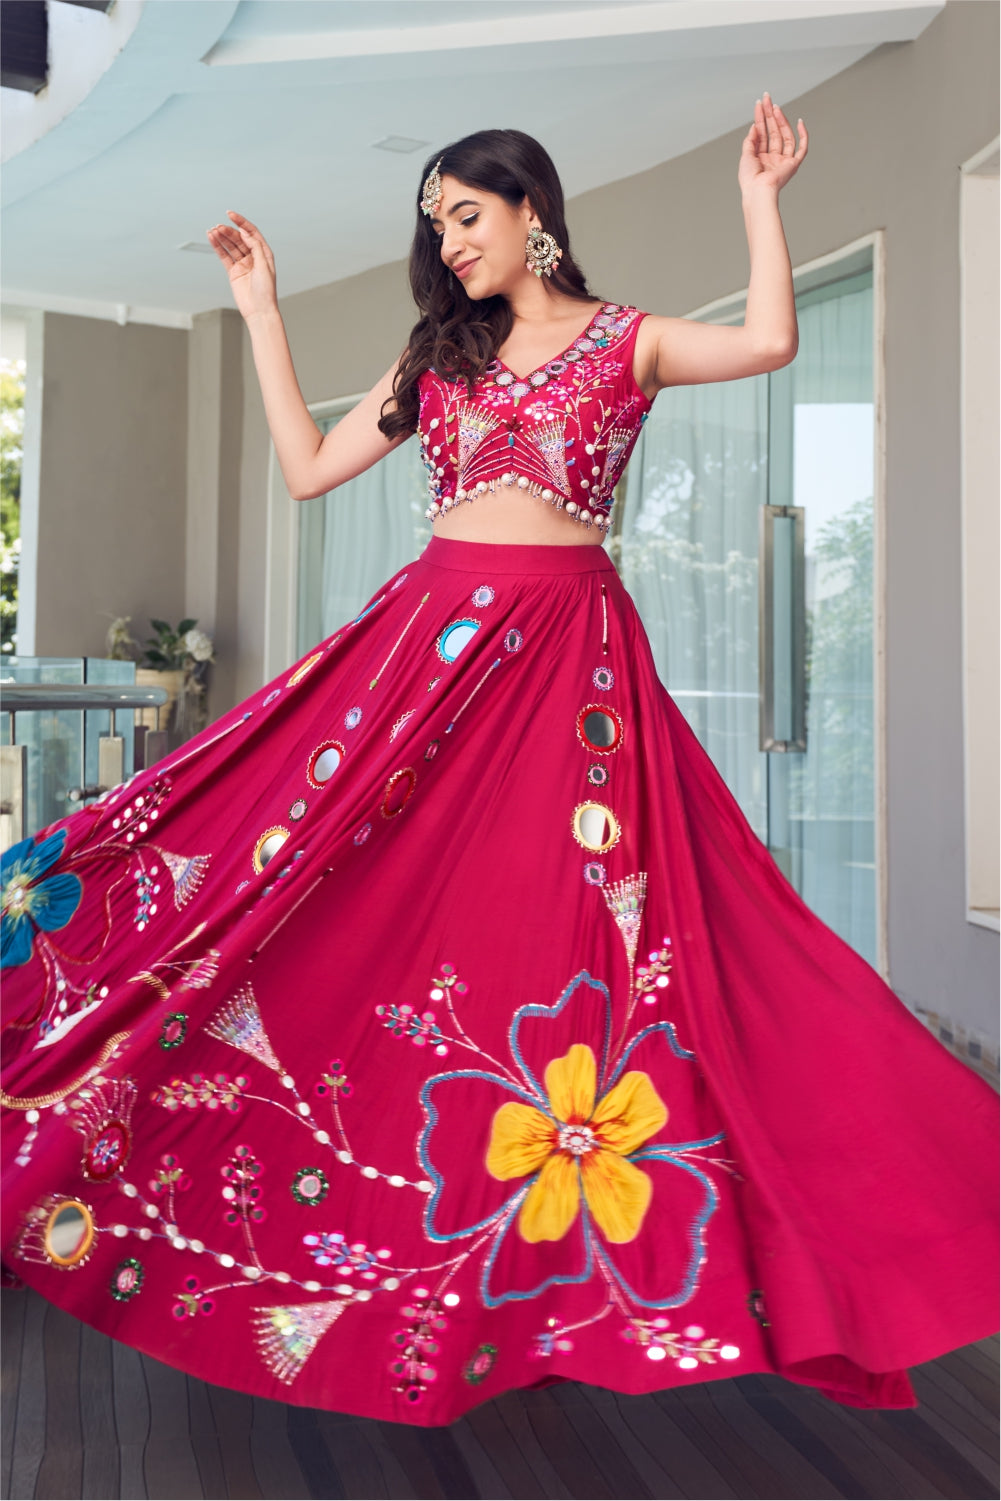 Magenta Machine Embroidered Lehenga Set Highlighted With Mirror and Pearl Work (7960737153270)